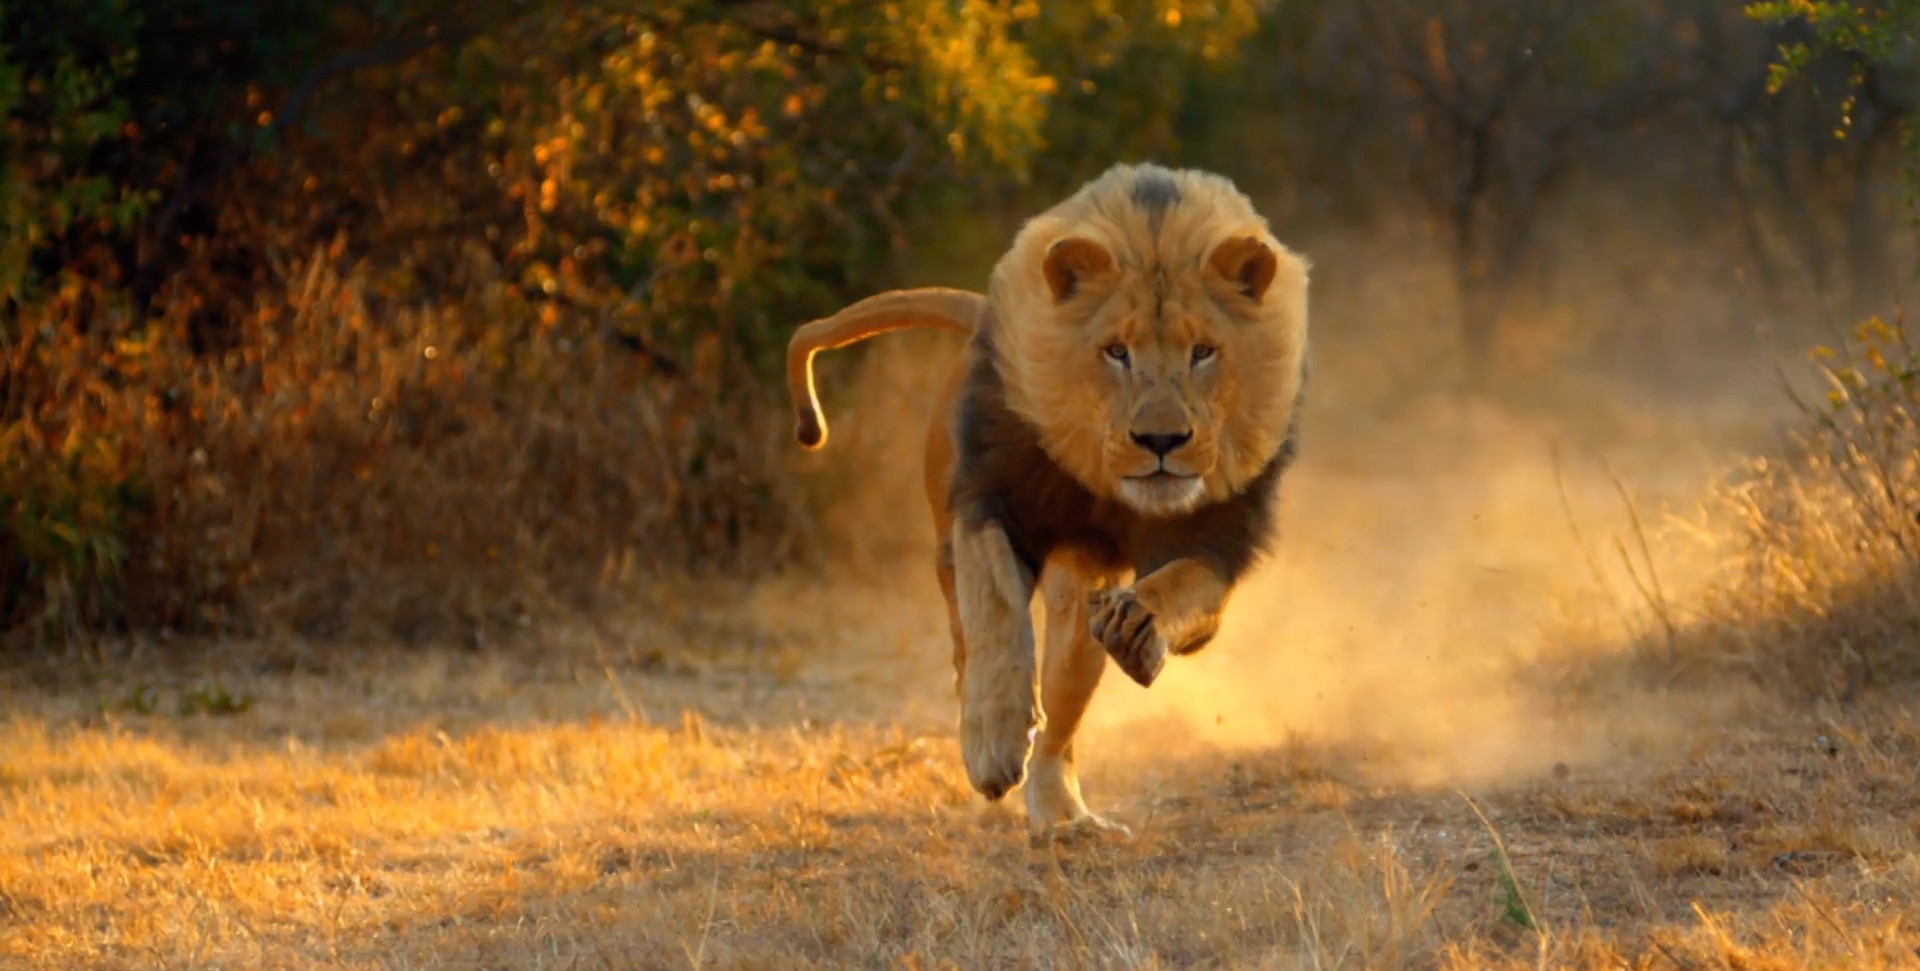 Lion “attacks” hunters in South Africa